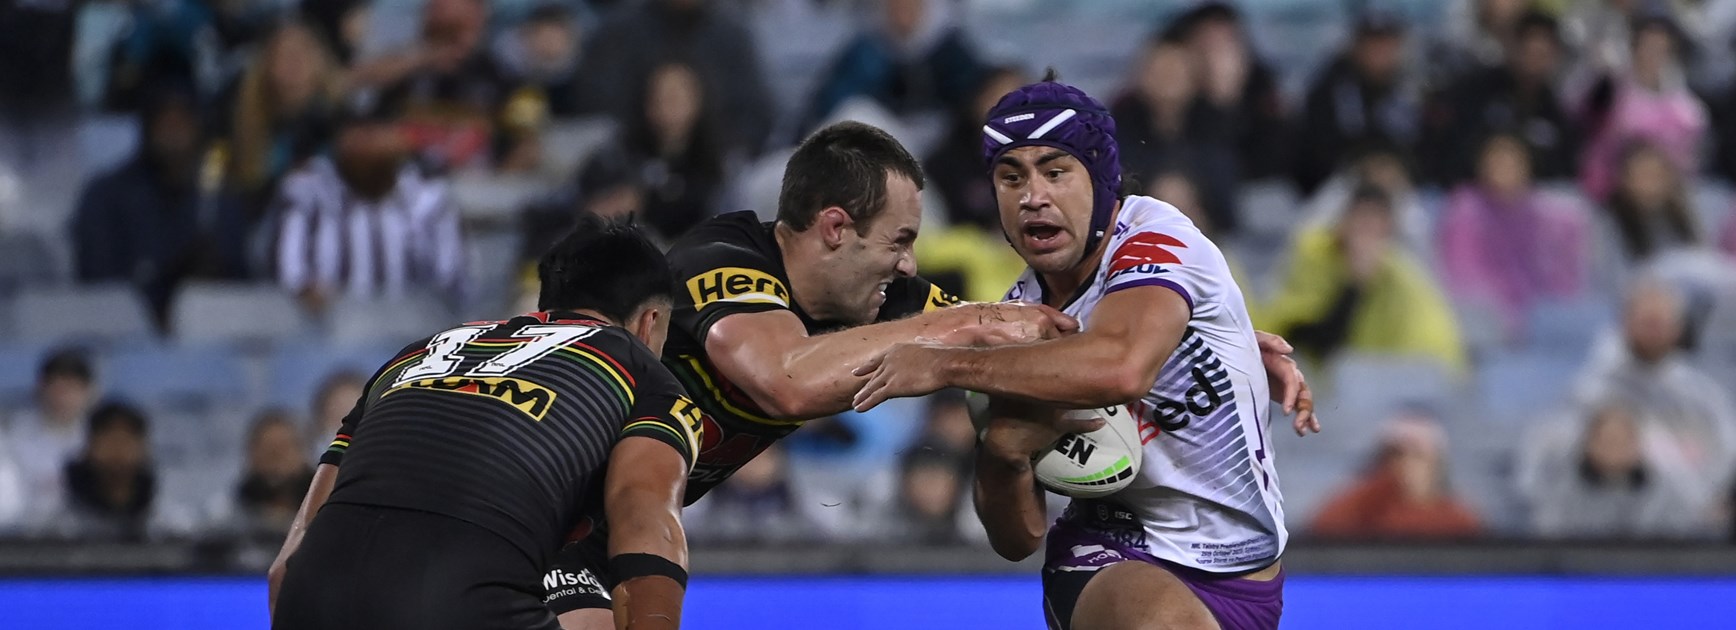 Storm kick off Hughes extension talks after thwarting rival raids